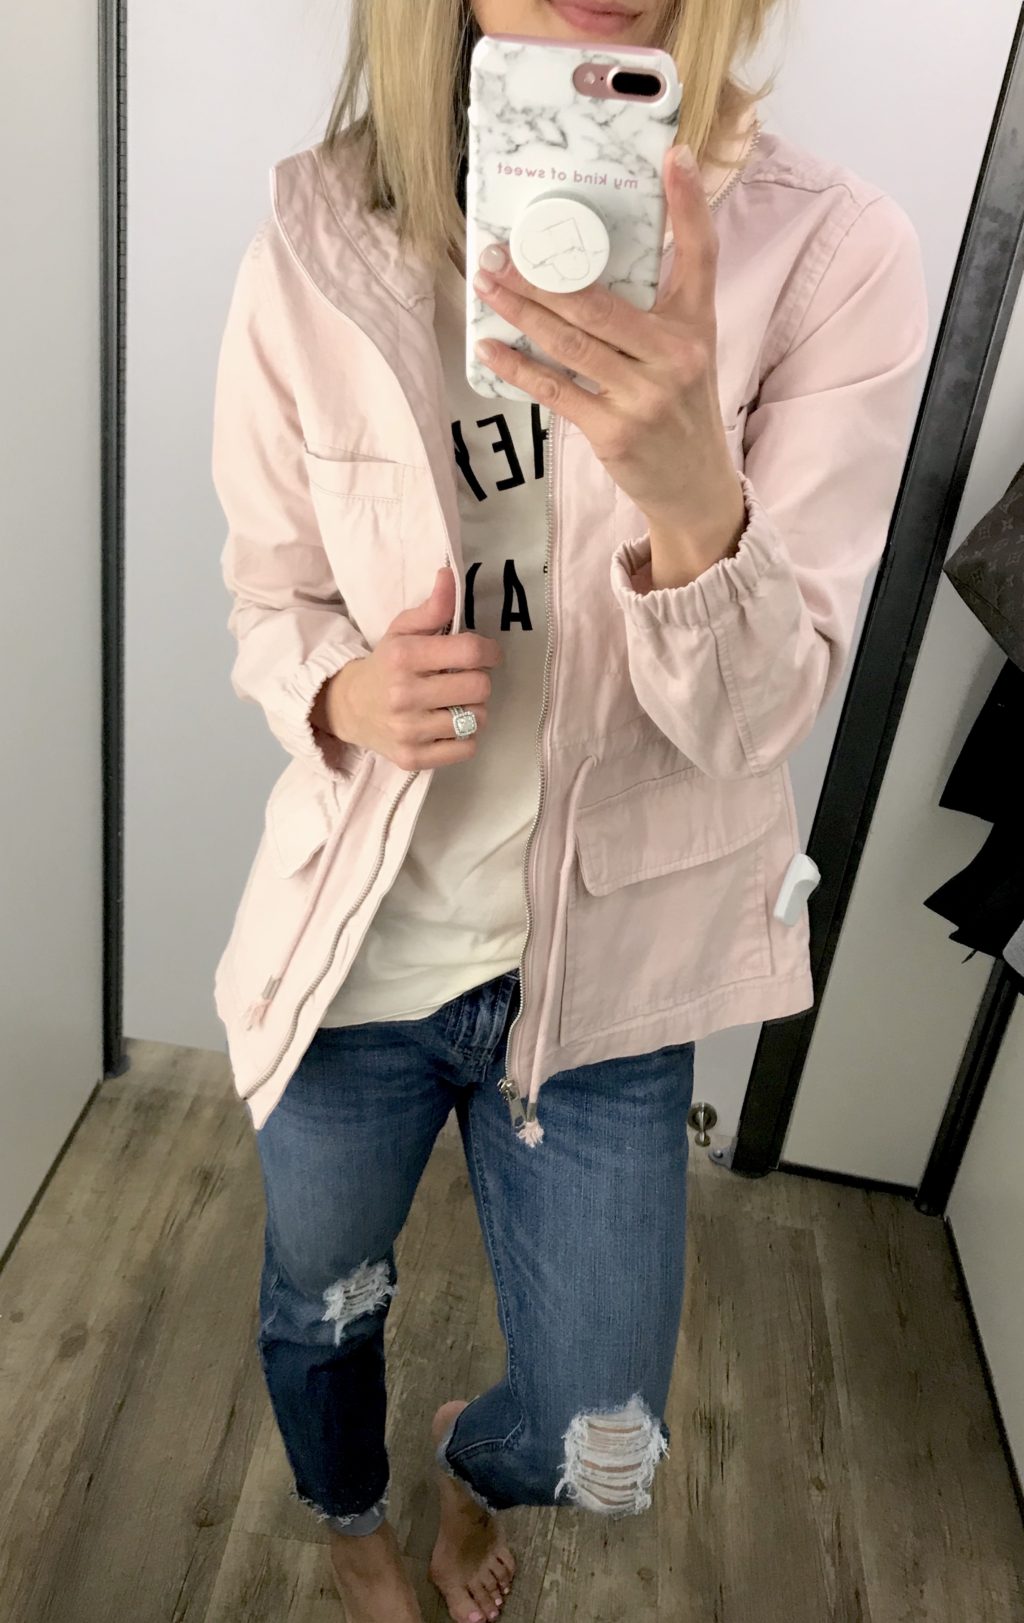 Old Navy try-on haul, graphic tee, pink jacket, distressed denim